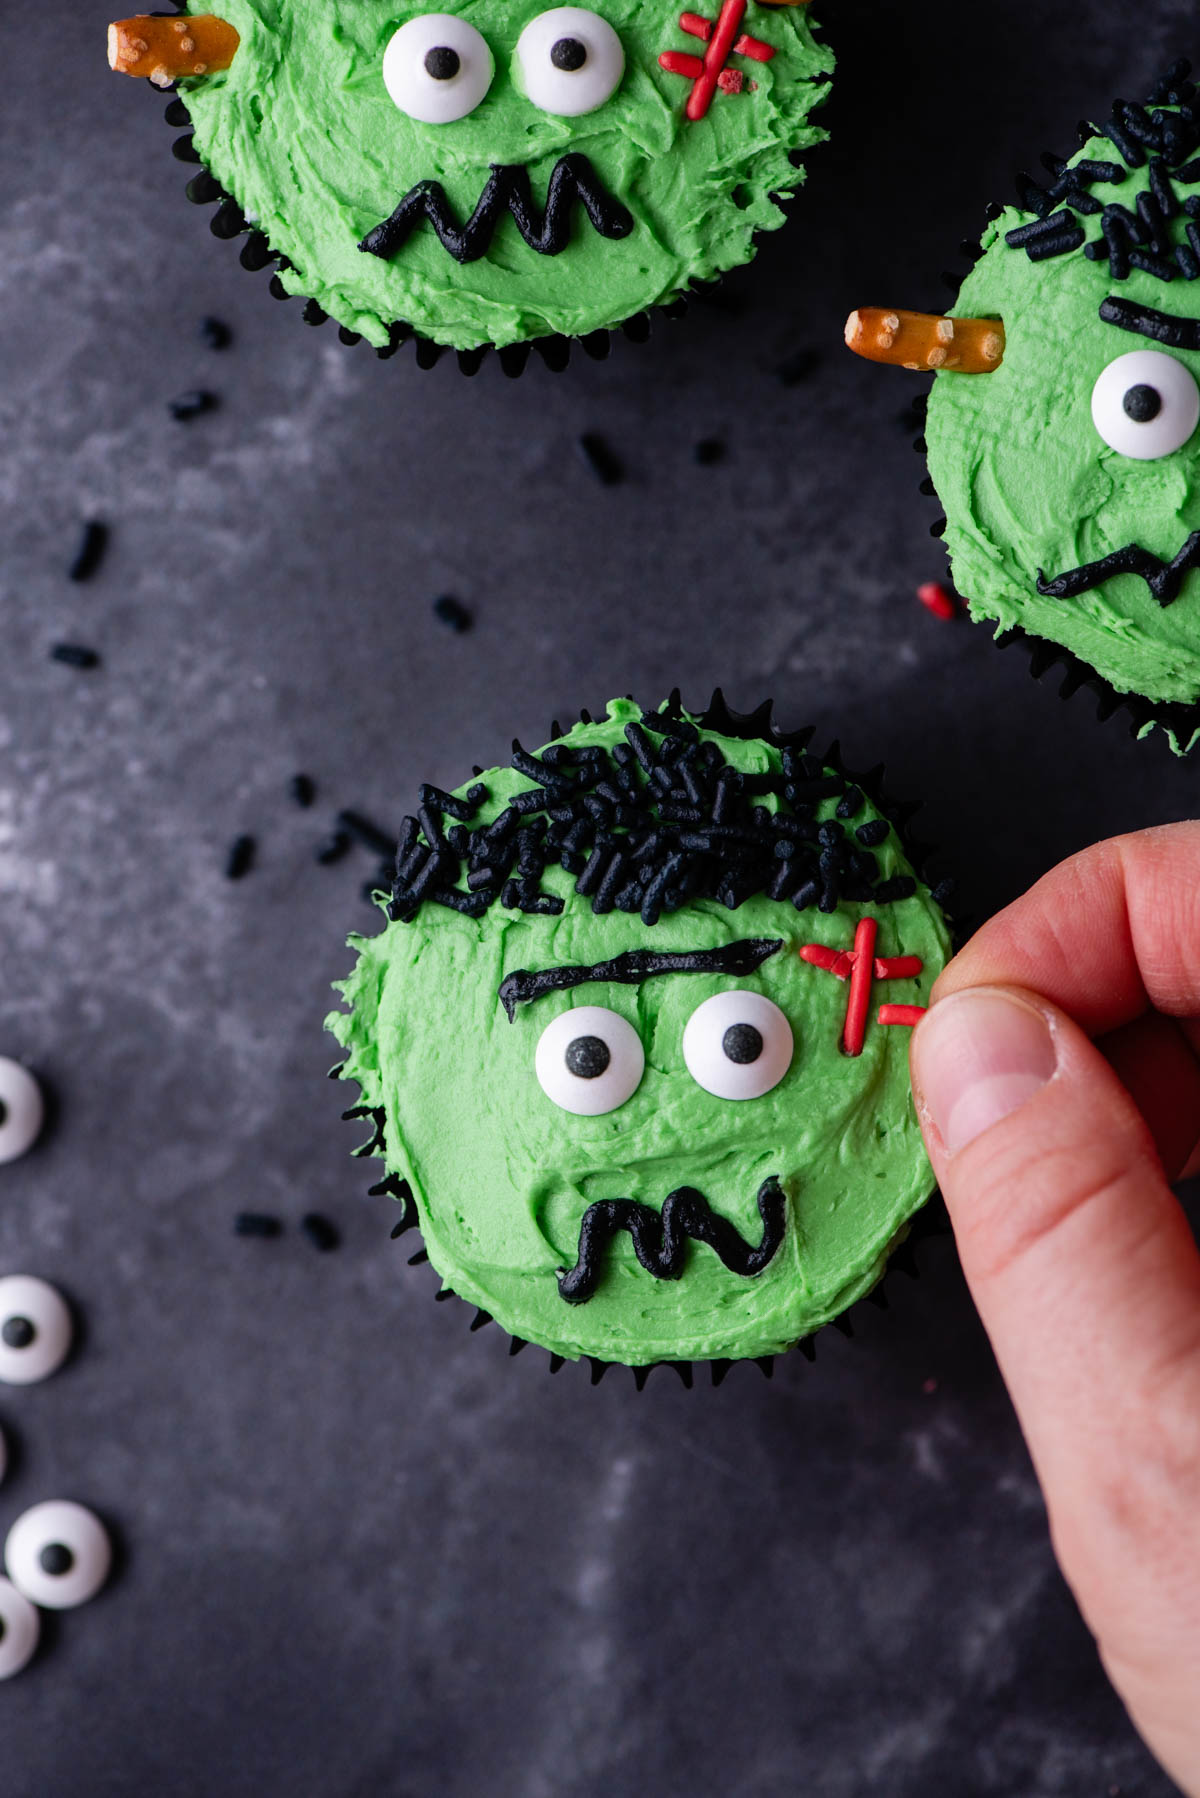 A frankenstein cupcake being decorated by adding red sprinkles for the stitch with more completed frankenstein cupcakes near it